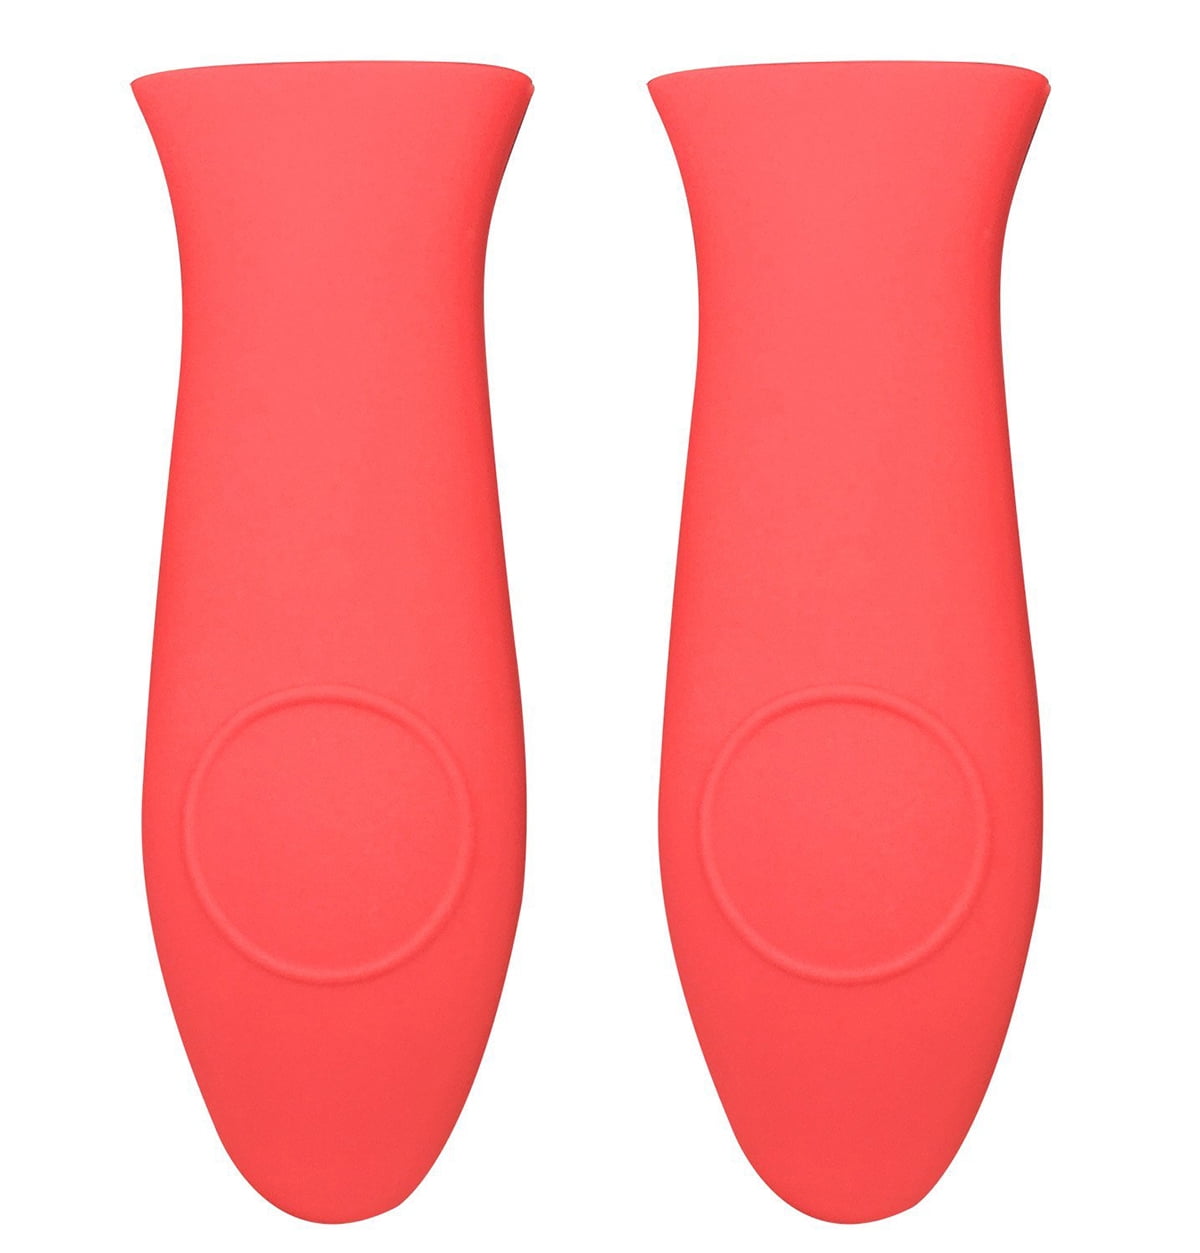 Details about   2PCS Silicone Hot Handle Pot Holder Cast Iron Skillets Sleeve Cover Grip B384 